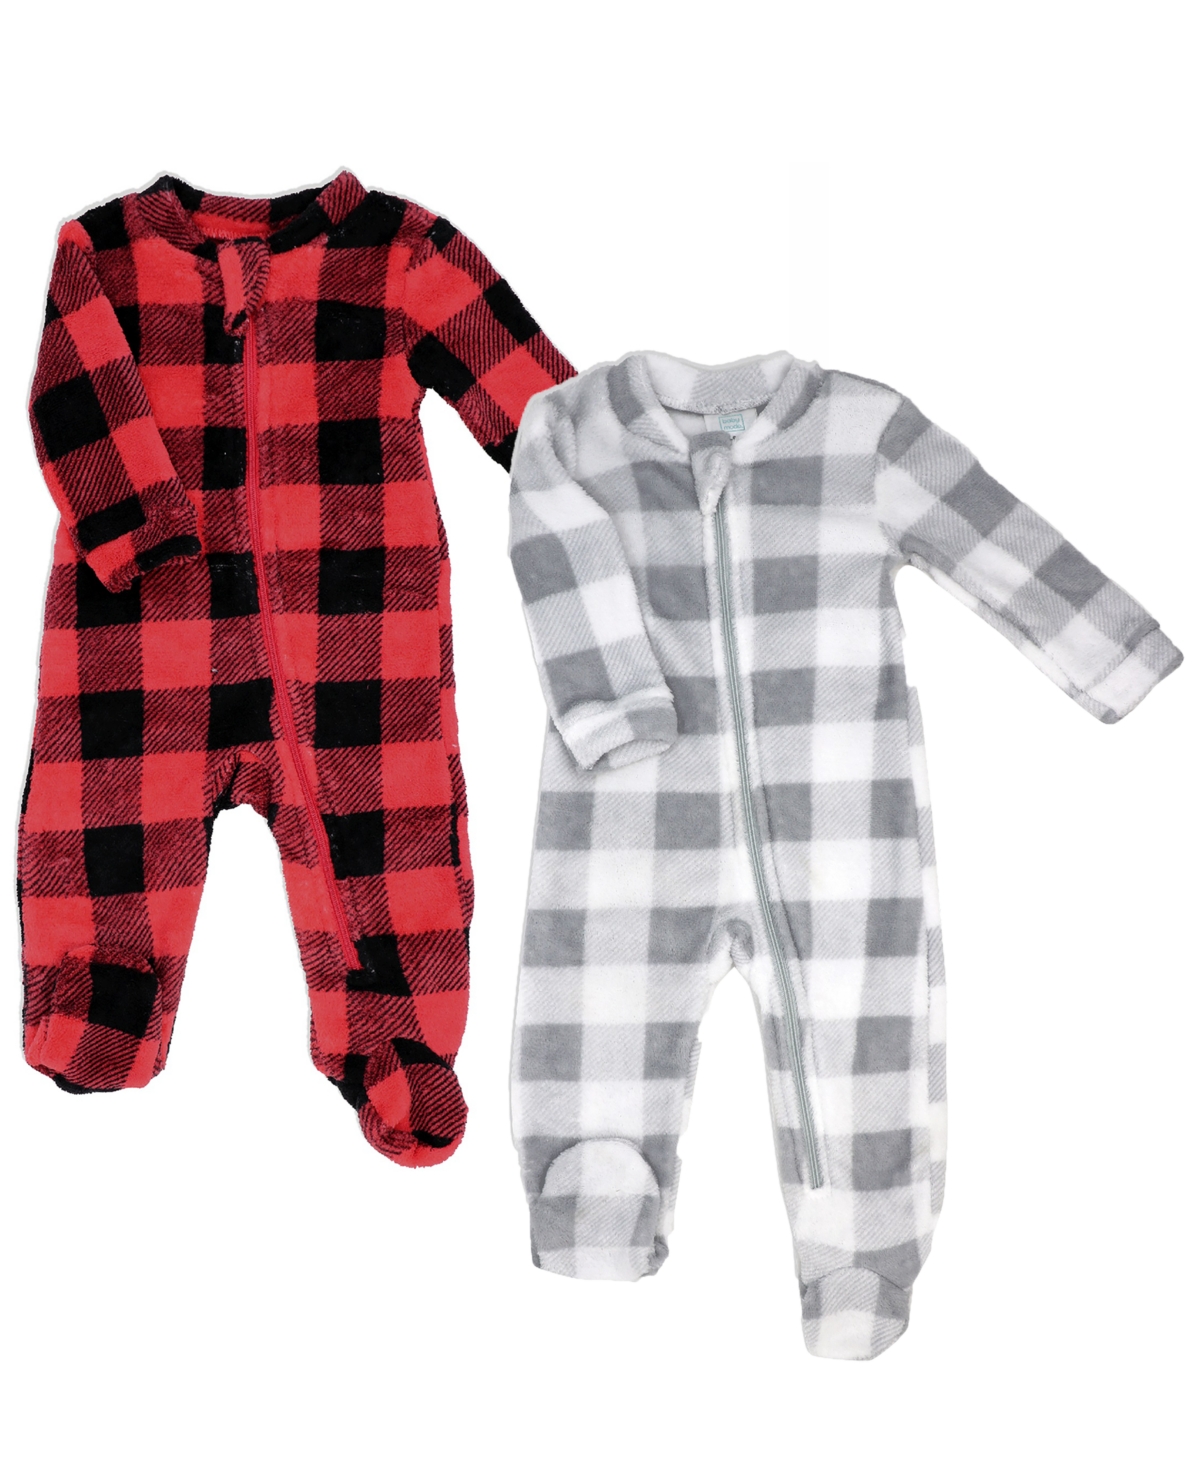 Shop Baby Mode Baby Boys Or Baby Girls Fleece Zippered Footies, Pack Of 2 In Red And Gray